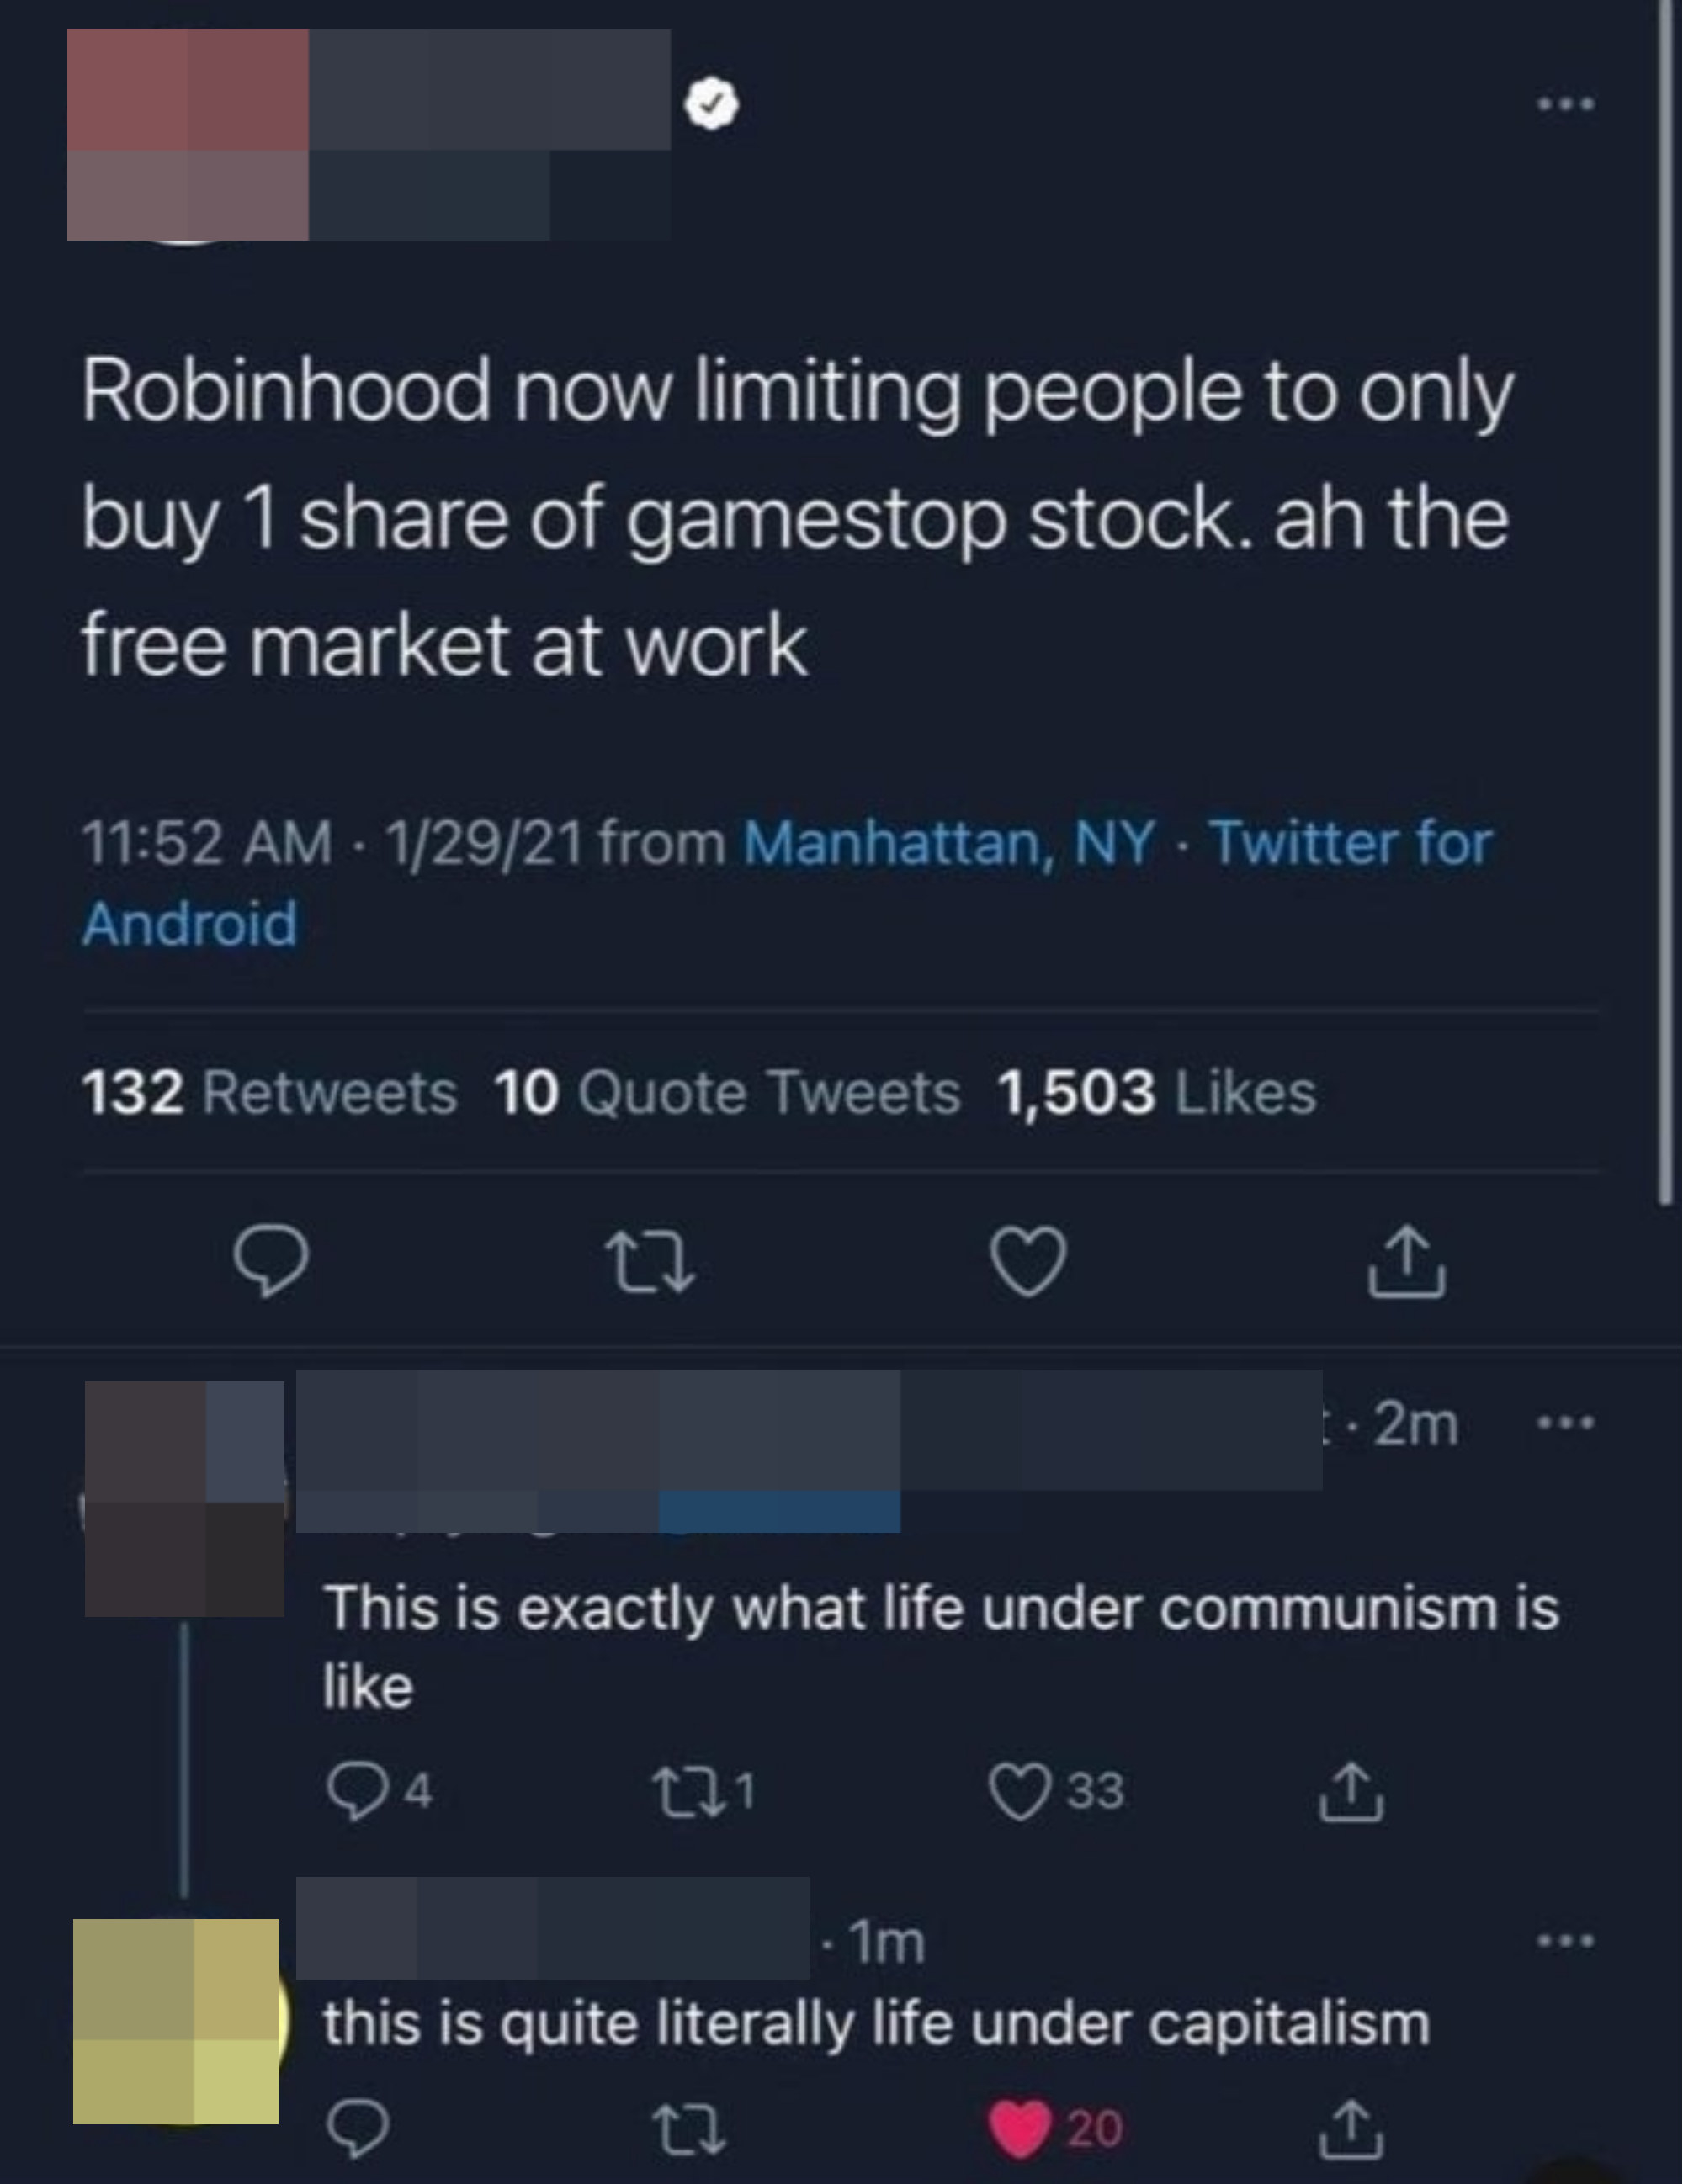 &quot;this is quite literally life under capitalism&quot; someone says to someone claiming that limiting stock buys is why they hate communism